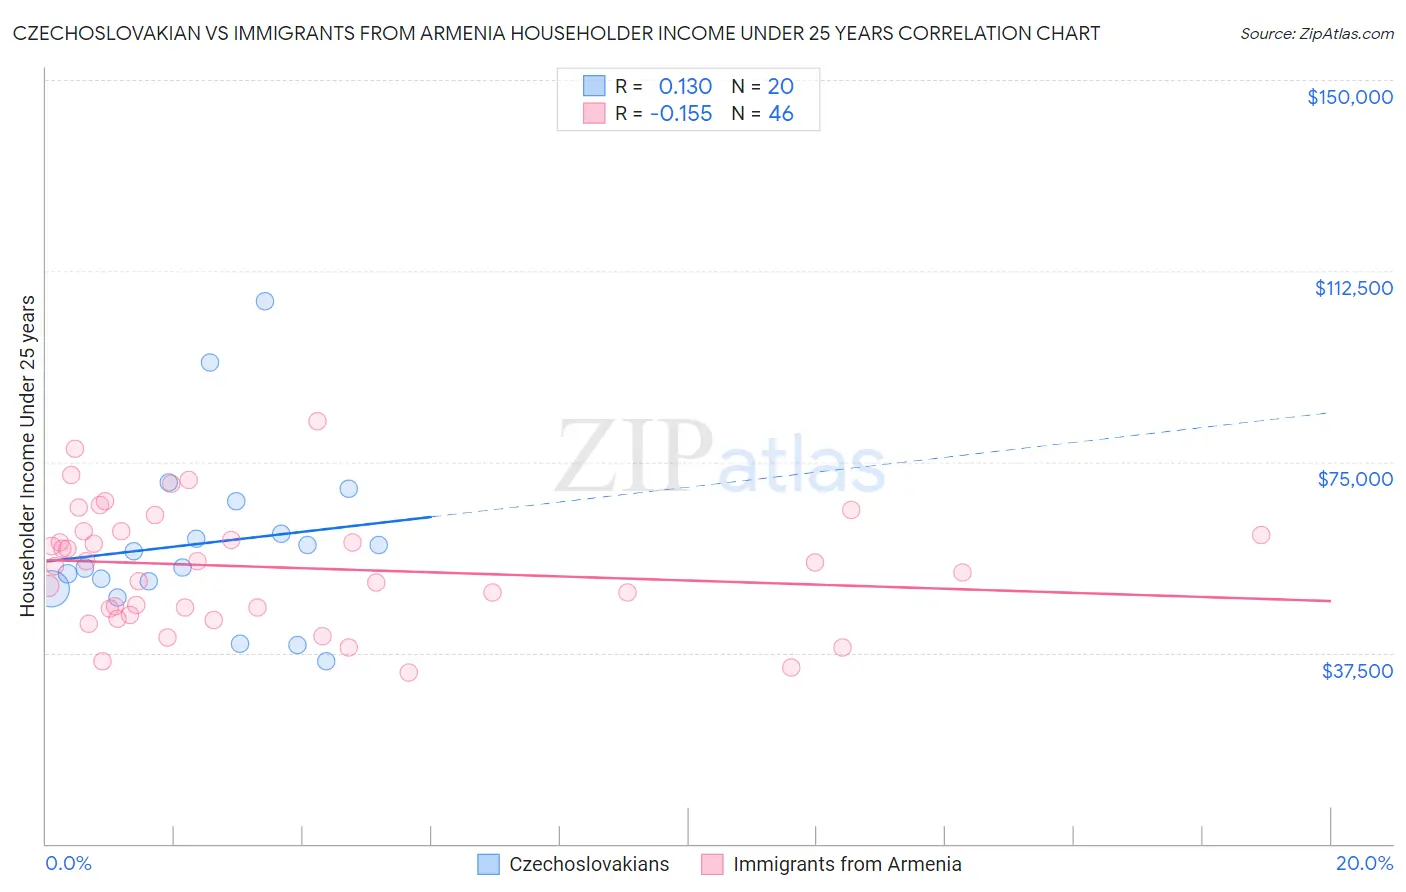 Czechoslovakian vs Immigrants from Armenia Householder Income Under 25 years